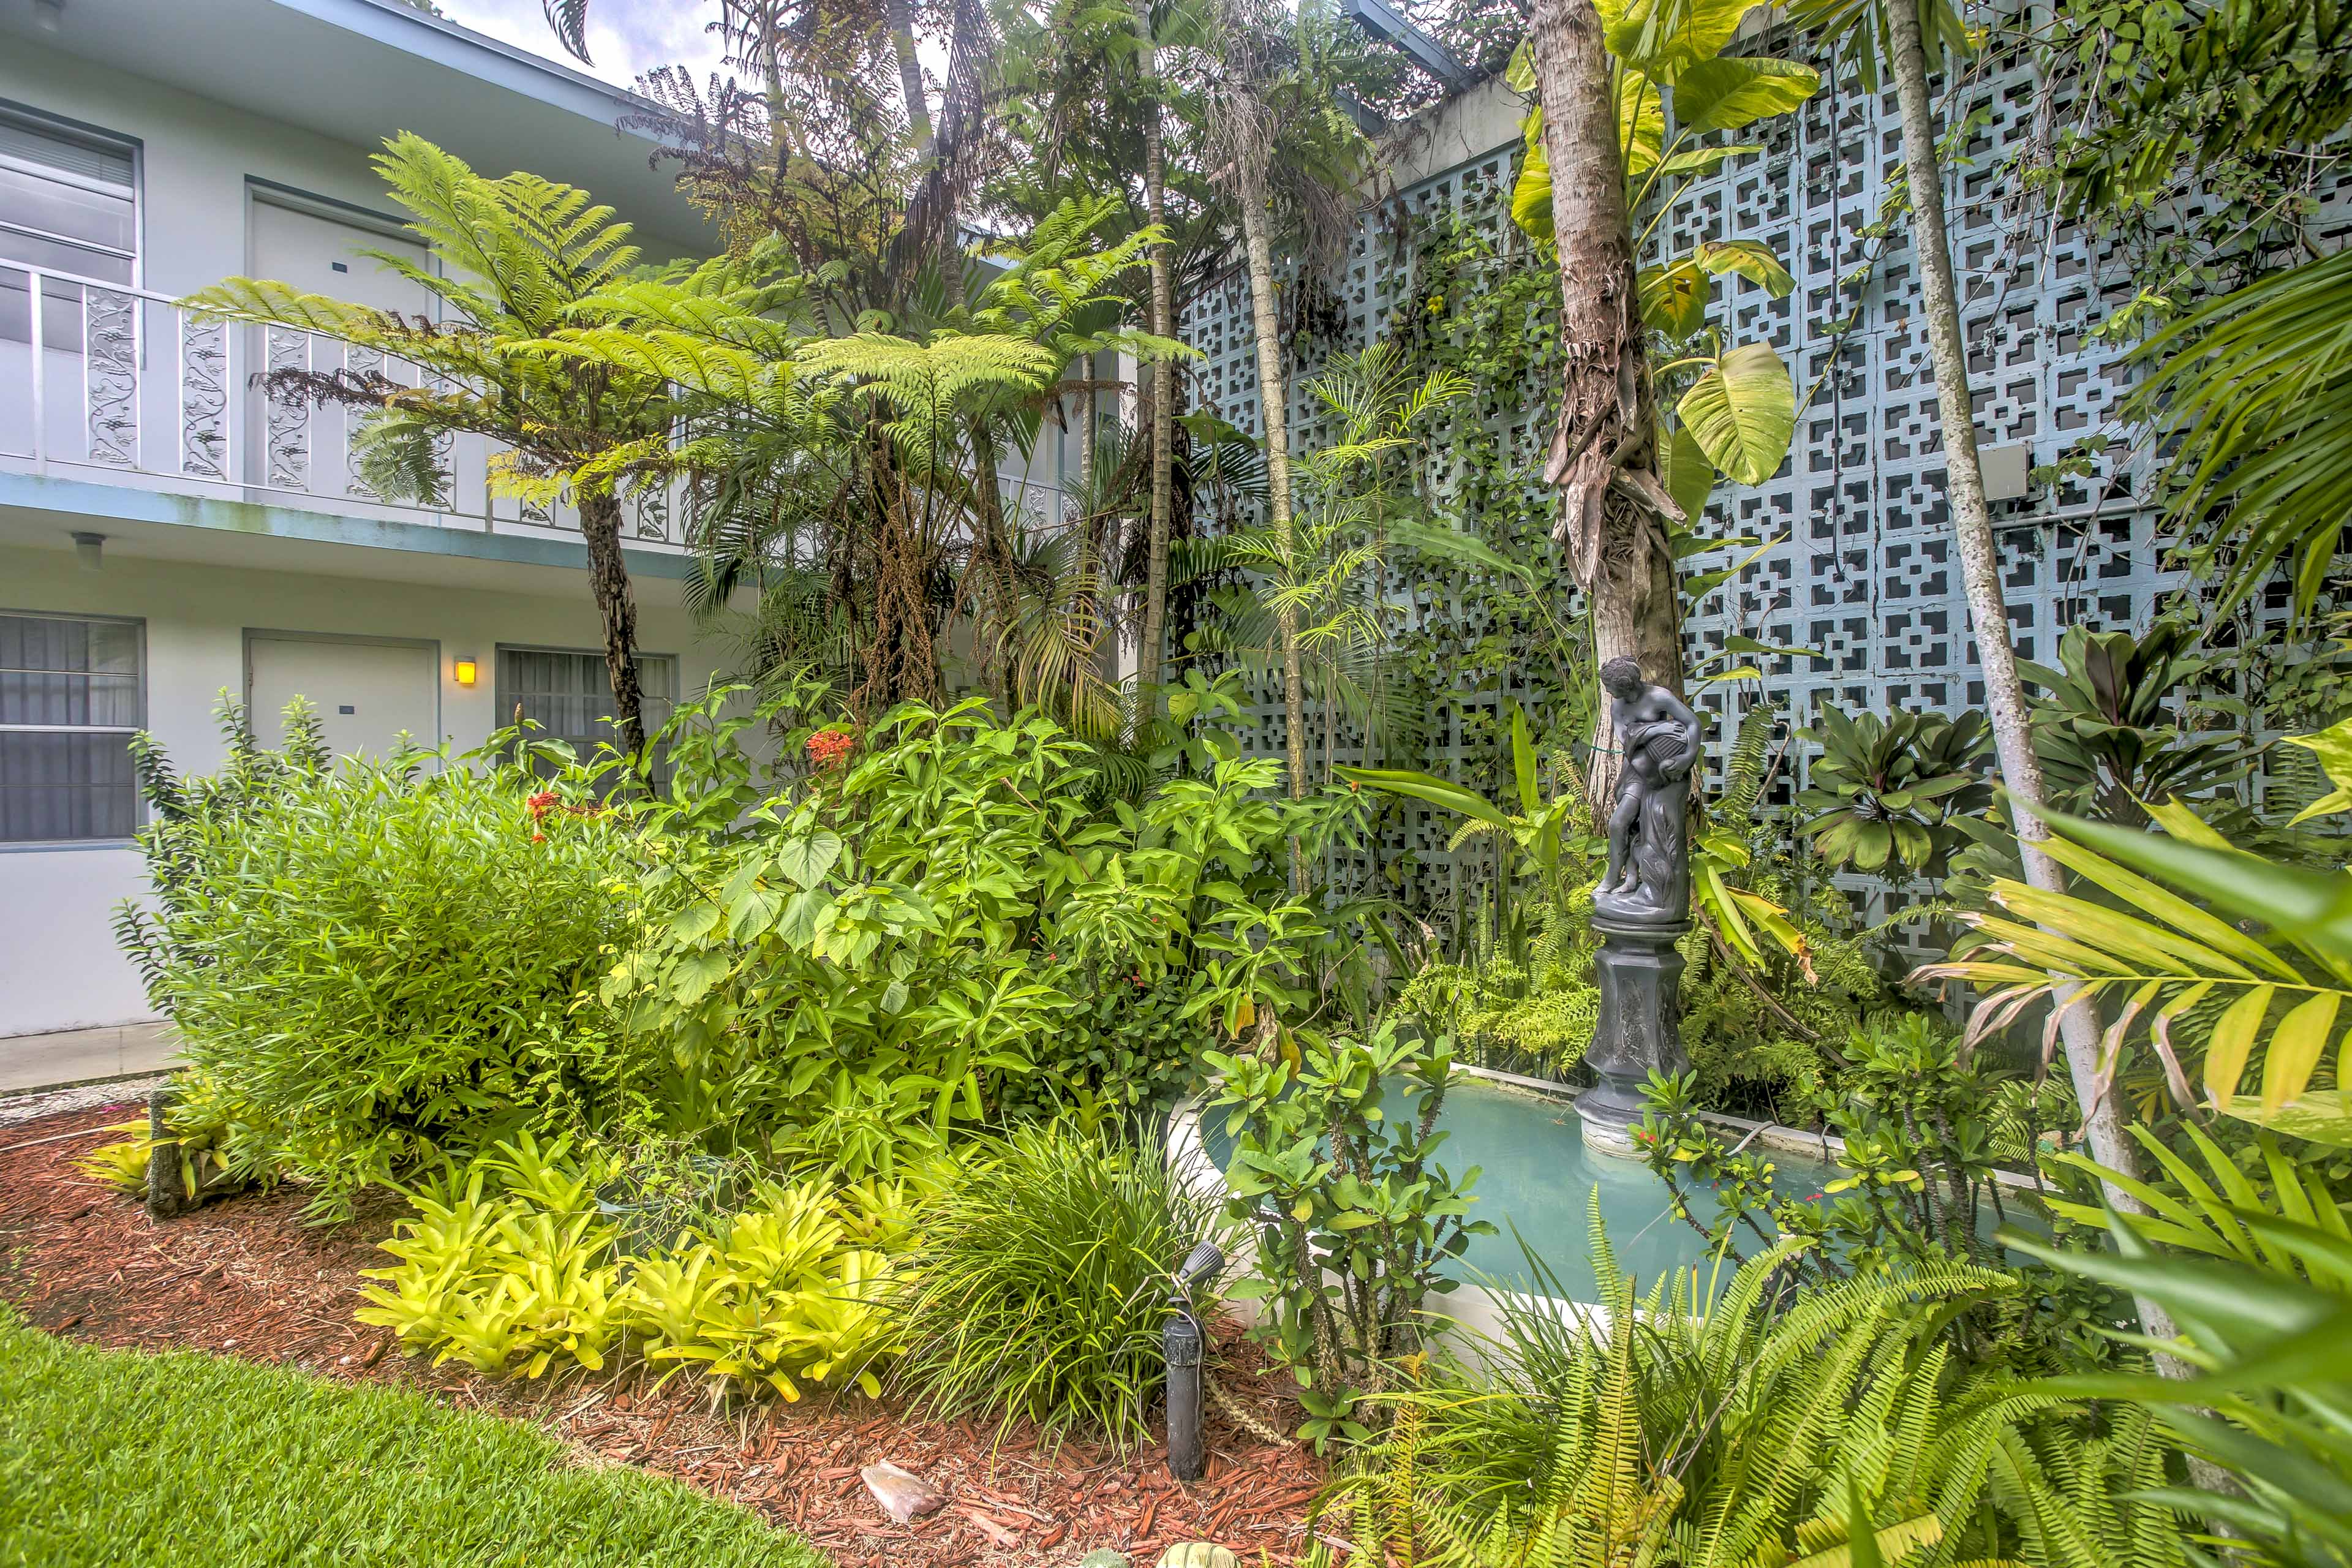 You'll love the vibrant greenery that greets you as you step outside the door.